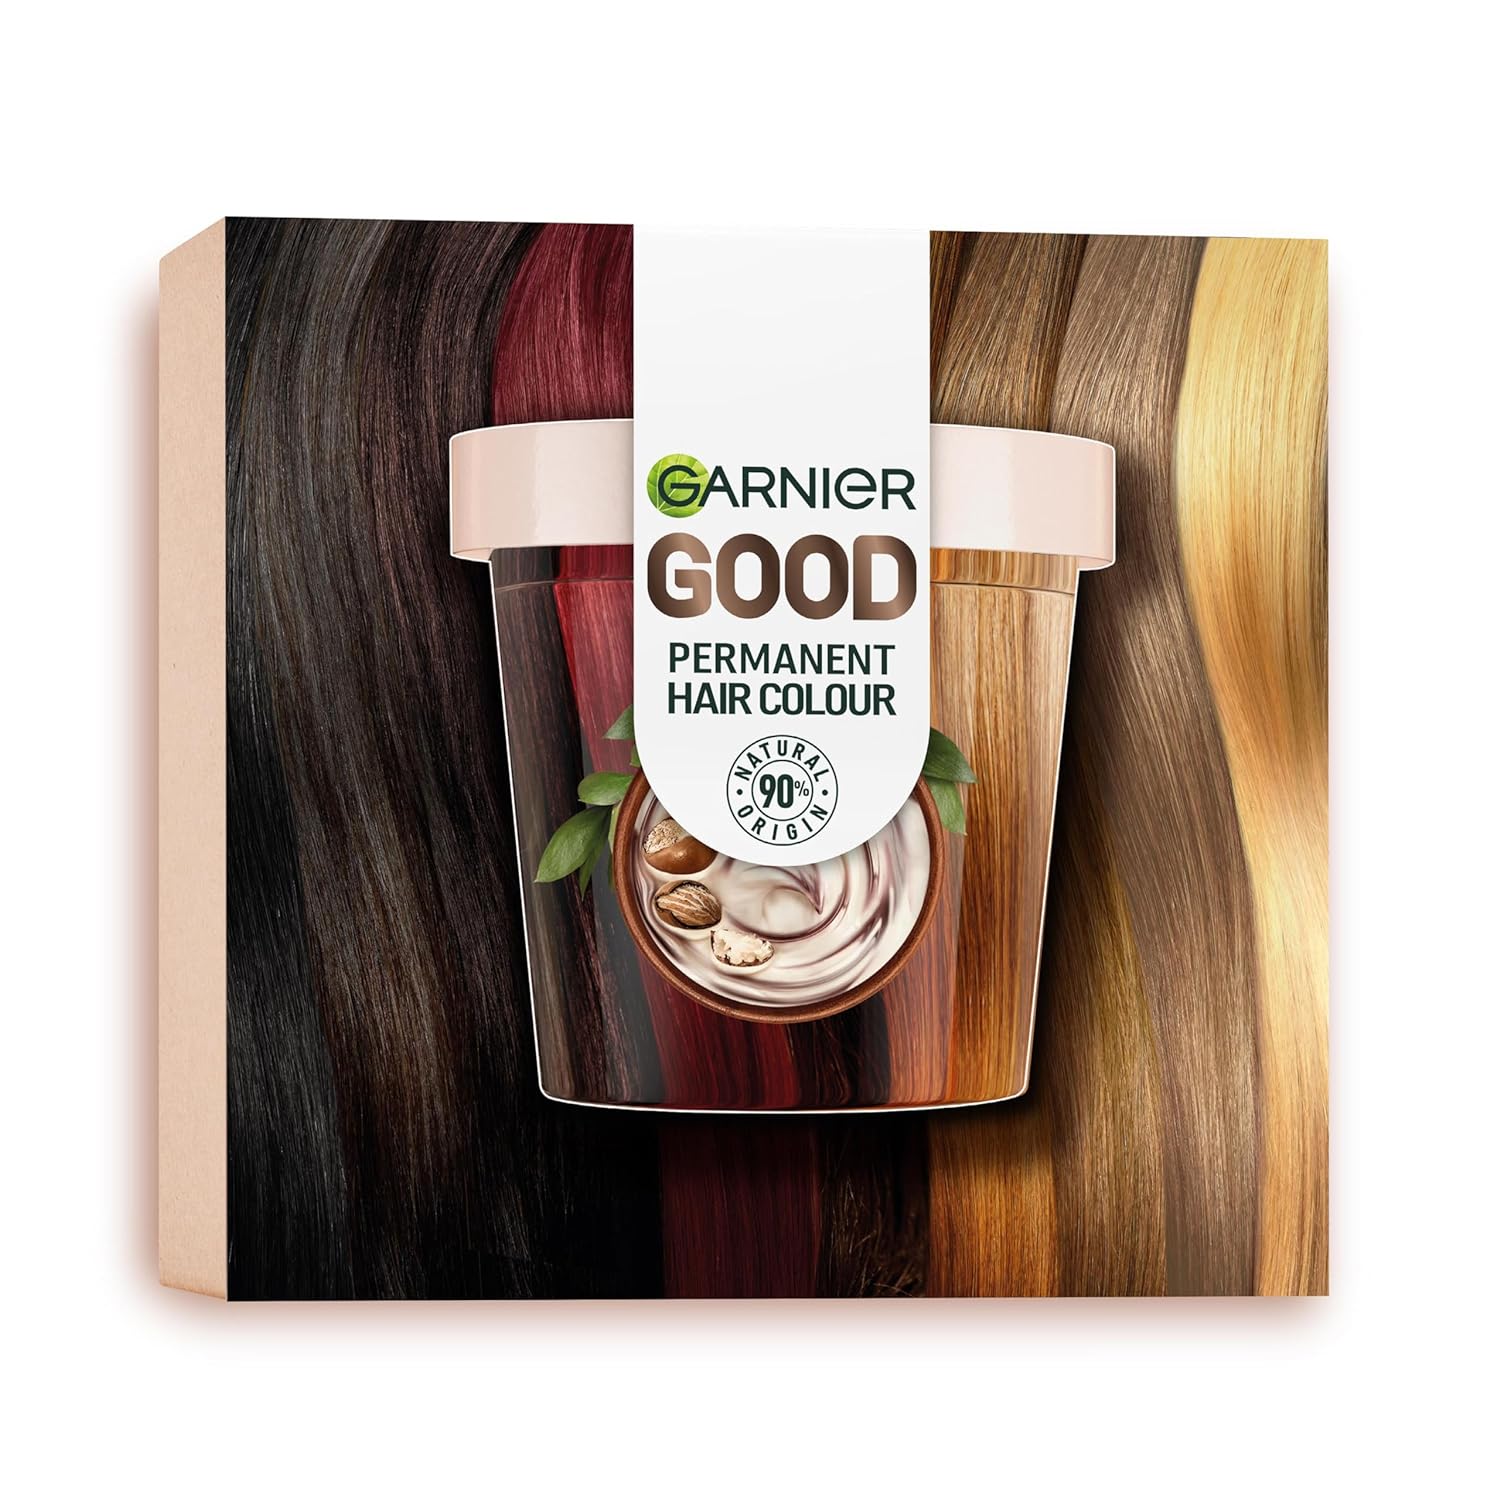 Garnier Permanent Hair Colour, Hard Dye Set for Intense and Long-Lasting Hair Colour, Colouration for up to 8 Weeks of Radiant Colour, No Ammonia, 2.0 Truffle Black, Good Refill Kit